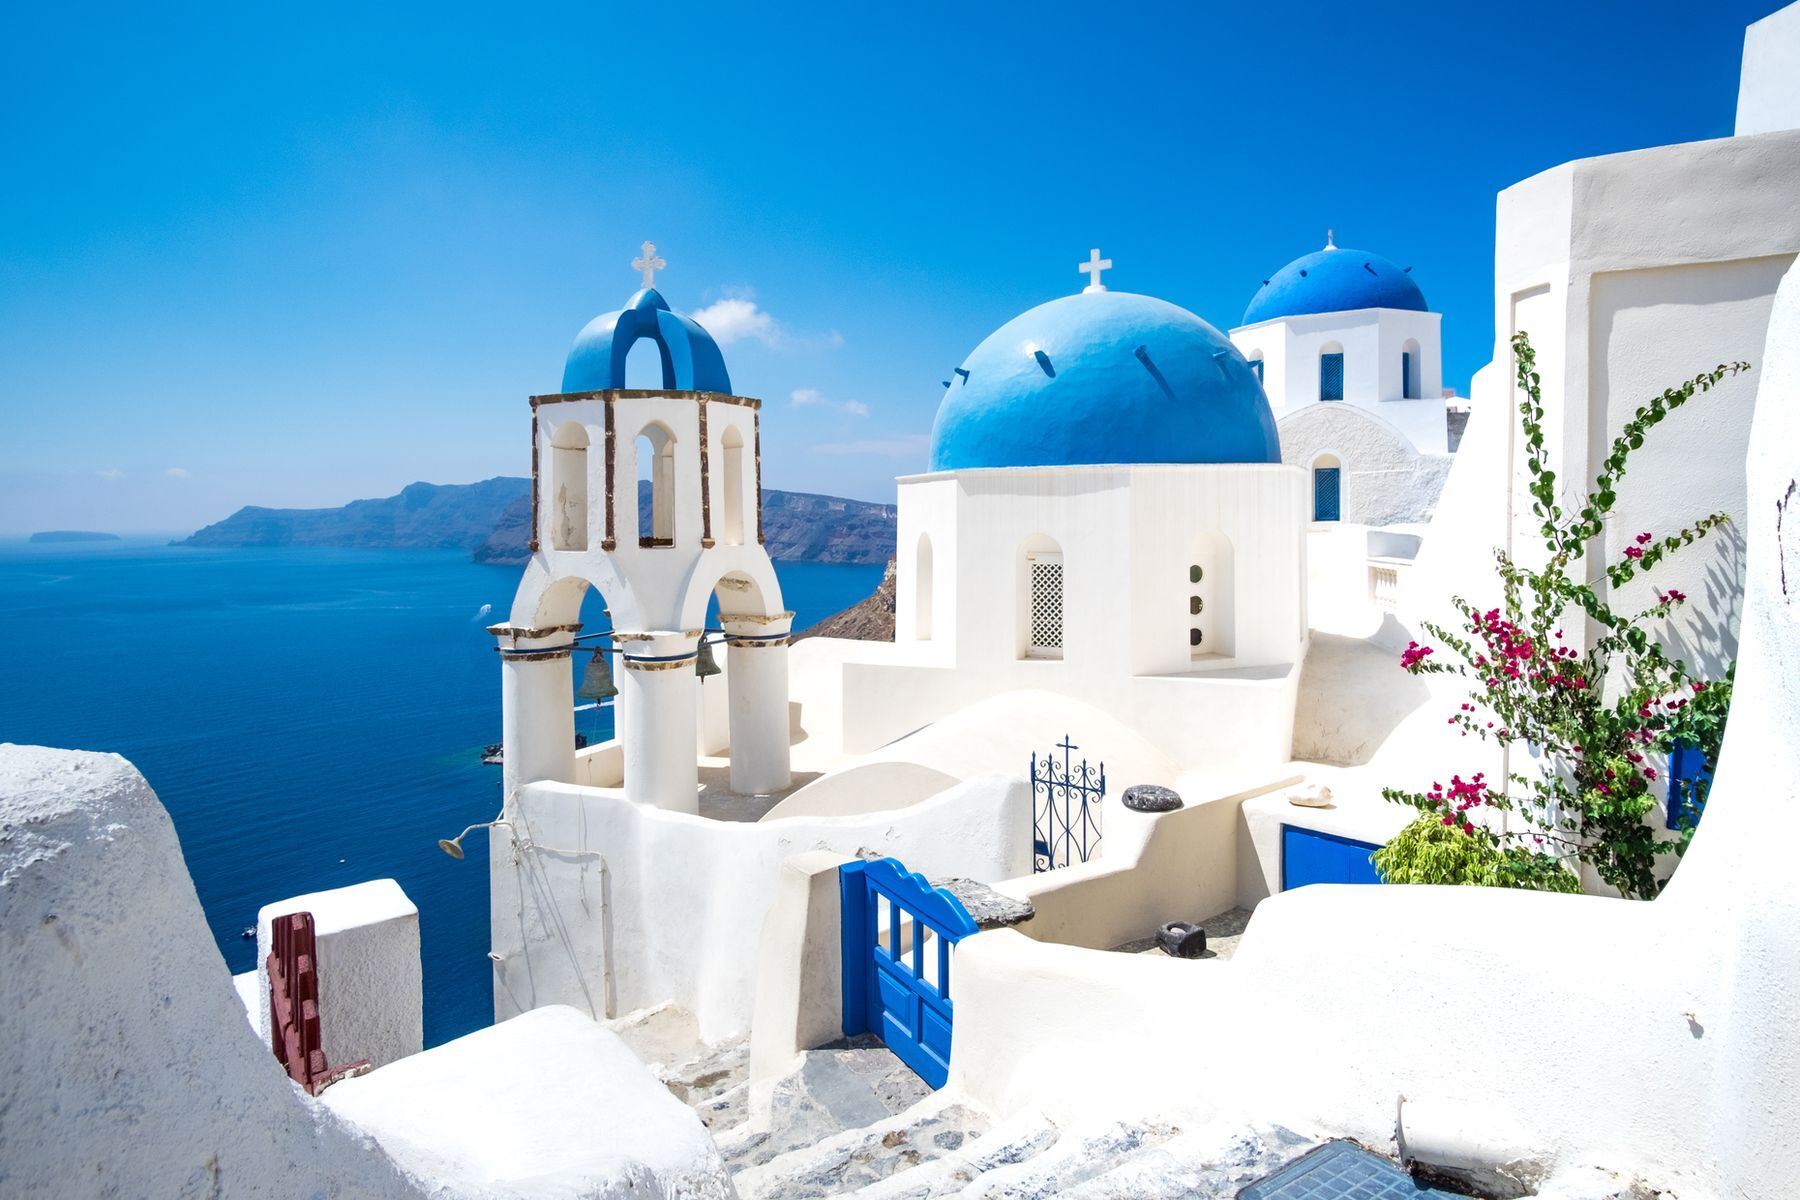 Famous for iconic sunsets, luxurious hotels, and picture-postcard scenery, <a href="https://www.discovergreece.com/cyclades/santorini" rel="noreferrer noopener">Santorini</a> is the perfect destination for lovers. Visitors are equally sure to be charmed by the hilltop village of <a href="https://santorintourisme.com/decouvrir/villages-quartiers/oia/" rel="noreferrer noopener">Oia</a>, <a href="https://www.santorini.com/villages/firatown.htm" rel="noreferrer noopener">Fira’s</a> whitewashed houses, and incredible panoramas of the Aegean Sea. Adventure lovers can explore the island by mountain bike with stops at the ancient <a href="https://www.discovergreece.com/experiences/tour-akrotiri-santorini" rel="noreferrer noopener">archaeological site of Akrotiri</a> and the <a href="https://www.greeka.com/cyclades/santorini/sightseeing/santorini-caldera/" rel="noreferrer noopener">caldera’s marvellous bay</a> before setting off on a boat trip.